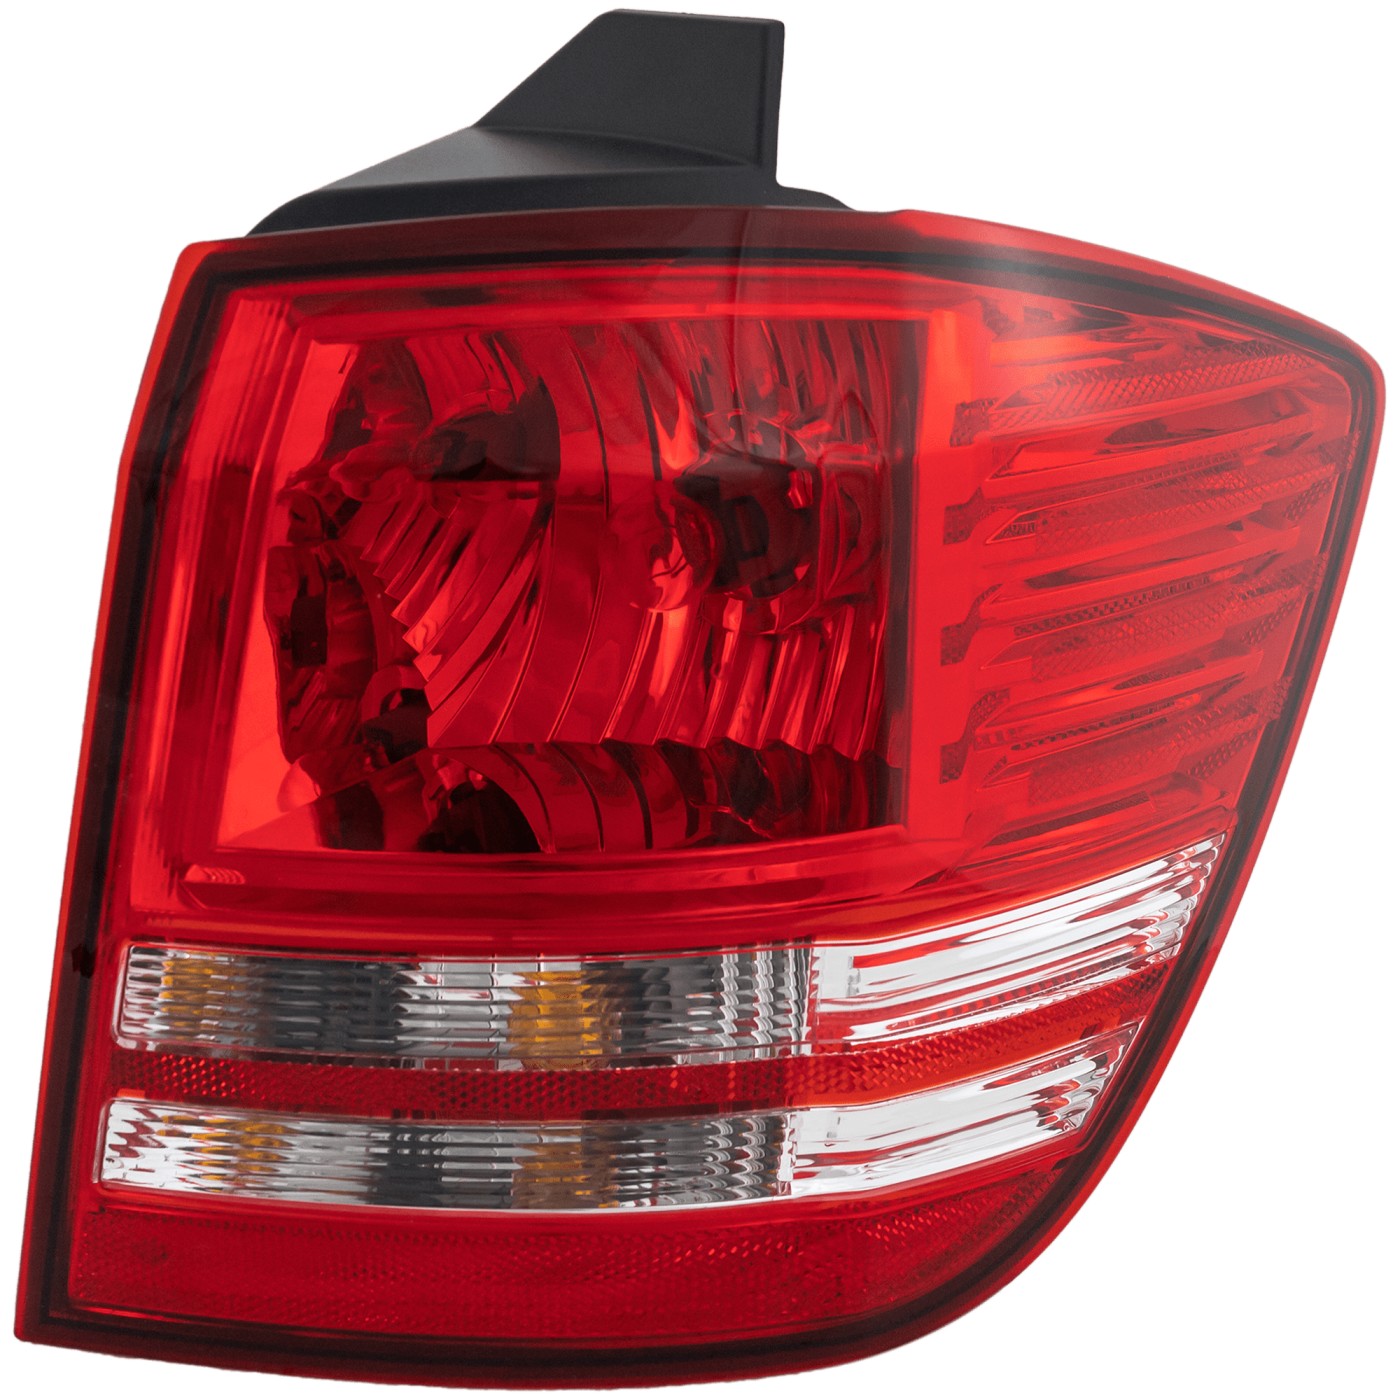 Tail Light For 2009-2018 Dodge Journey With Turn Signal Light Bulb Right Outer | eBay 2009 Dodge Journey Brake Lights Not Working